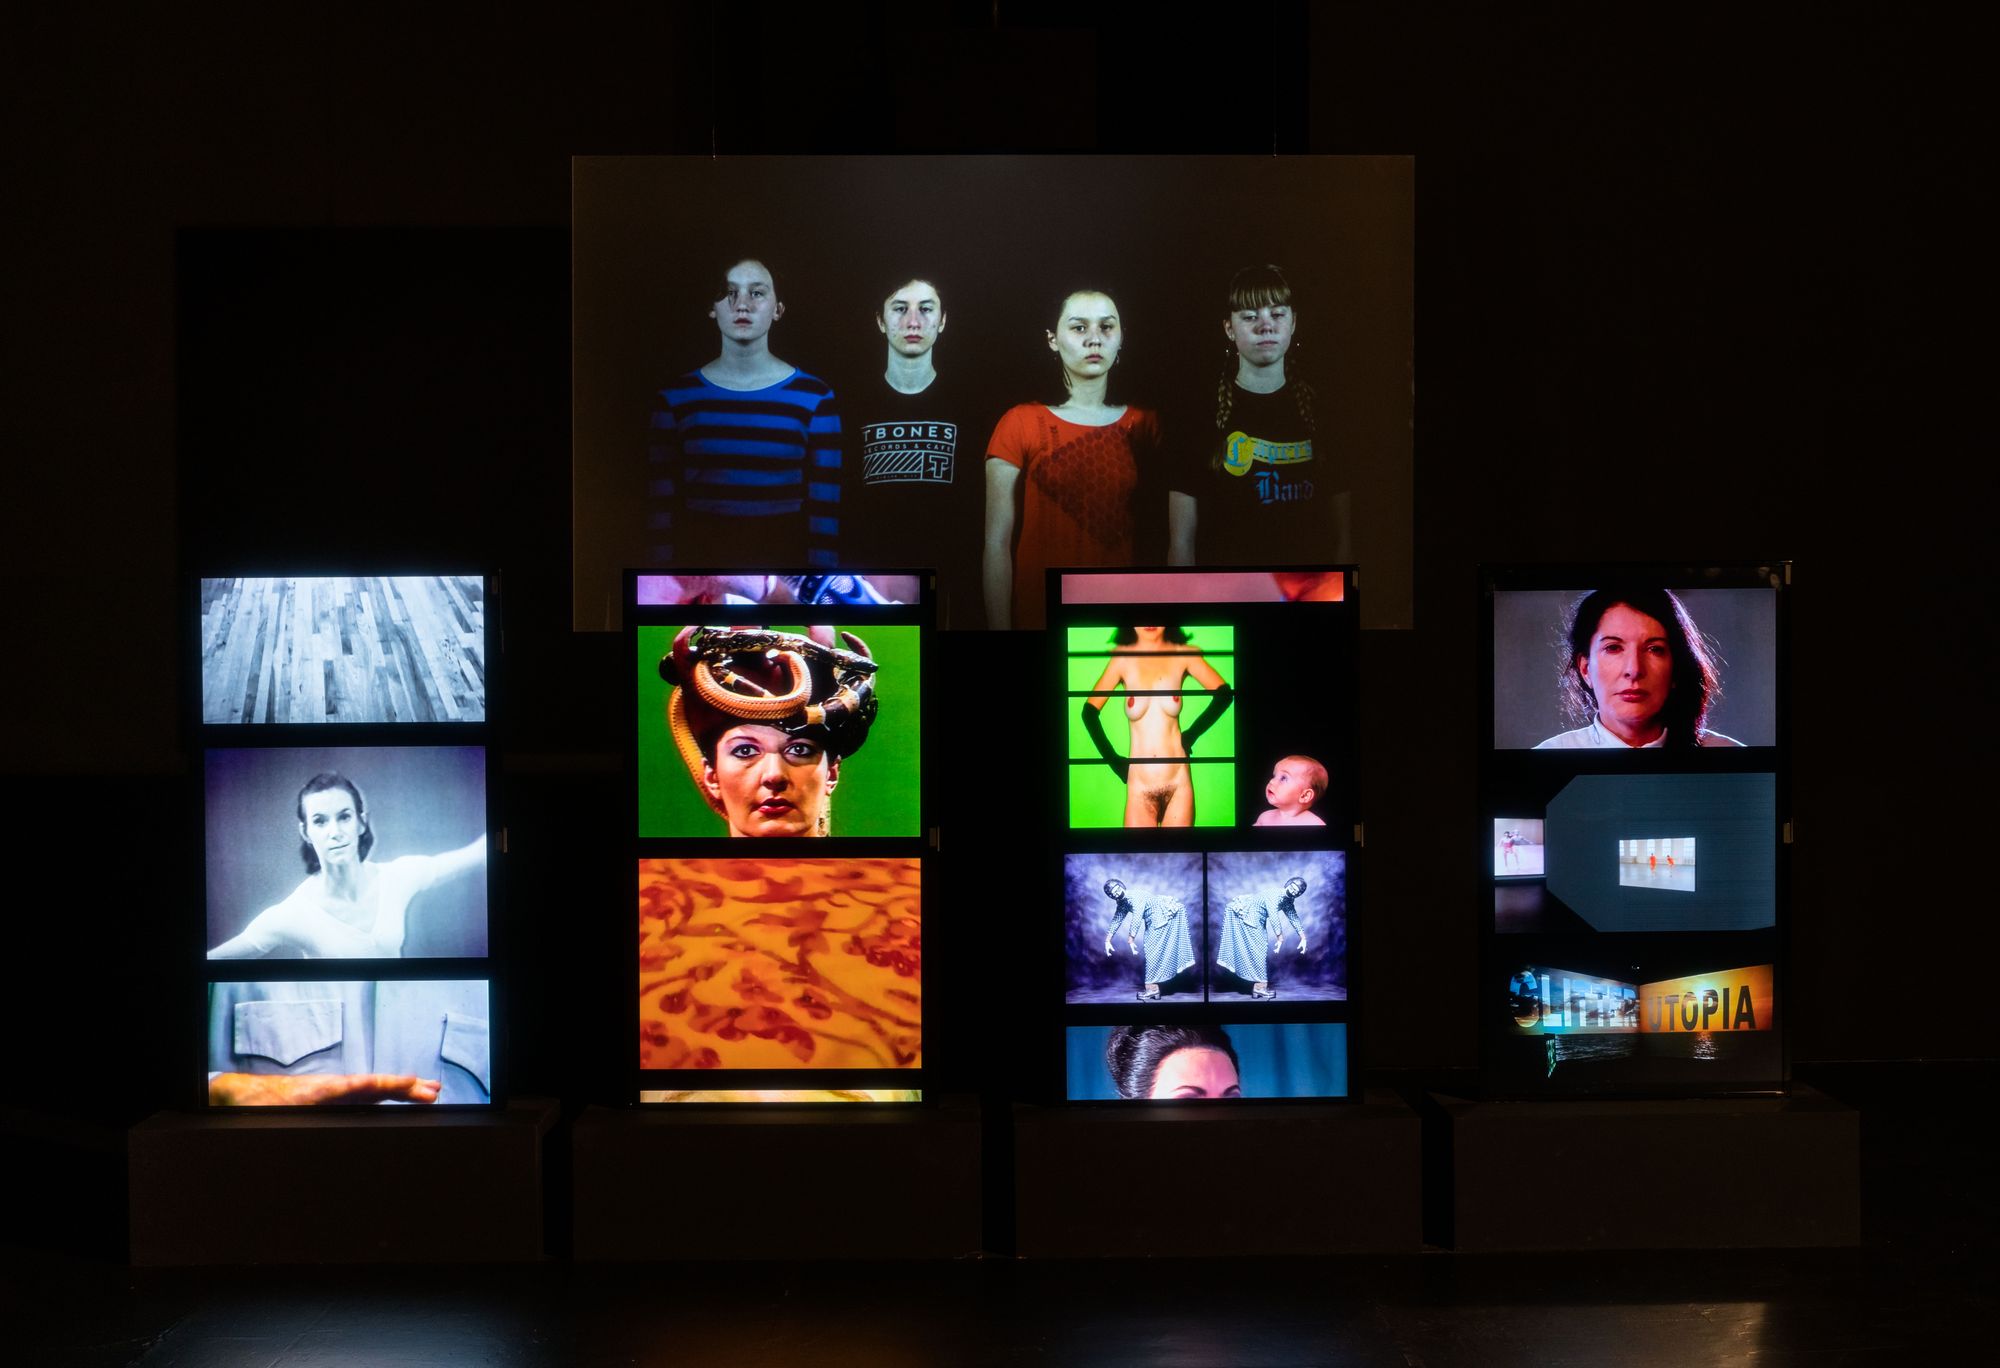 A cluster of TV monitors show various videos Charles Atlas's works.